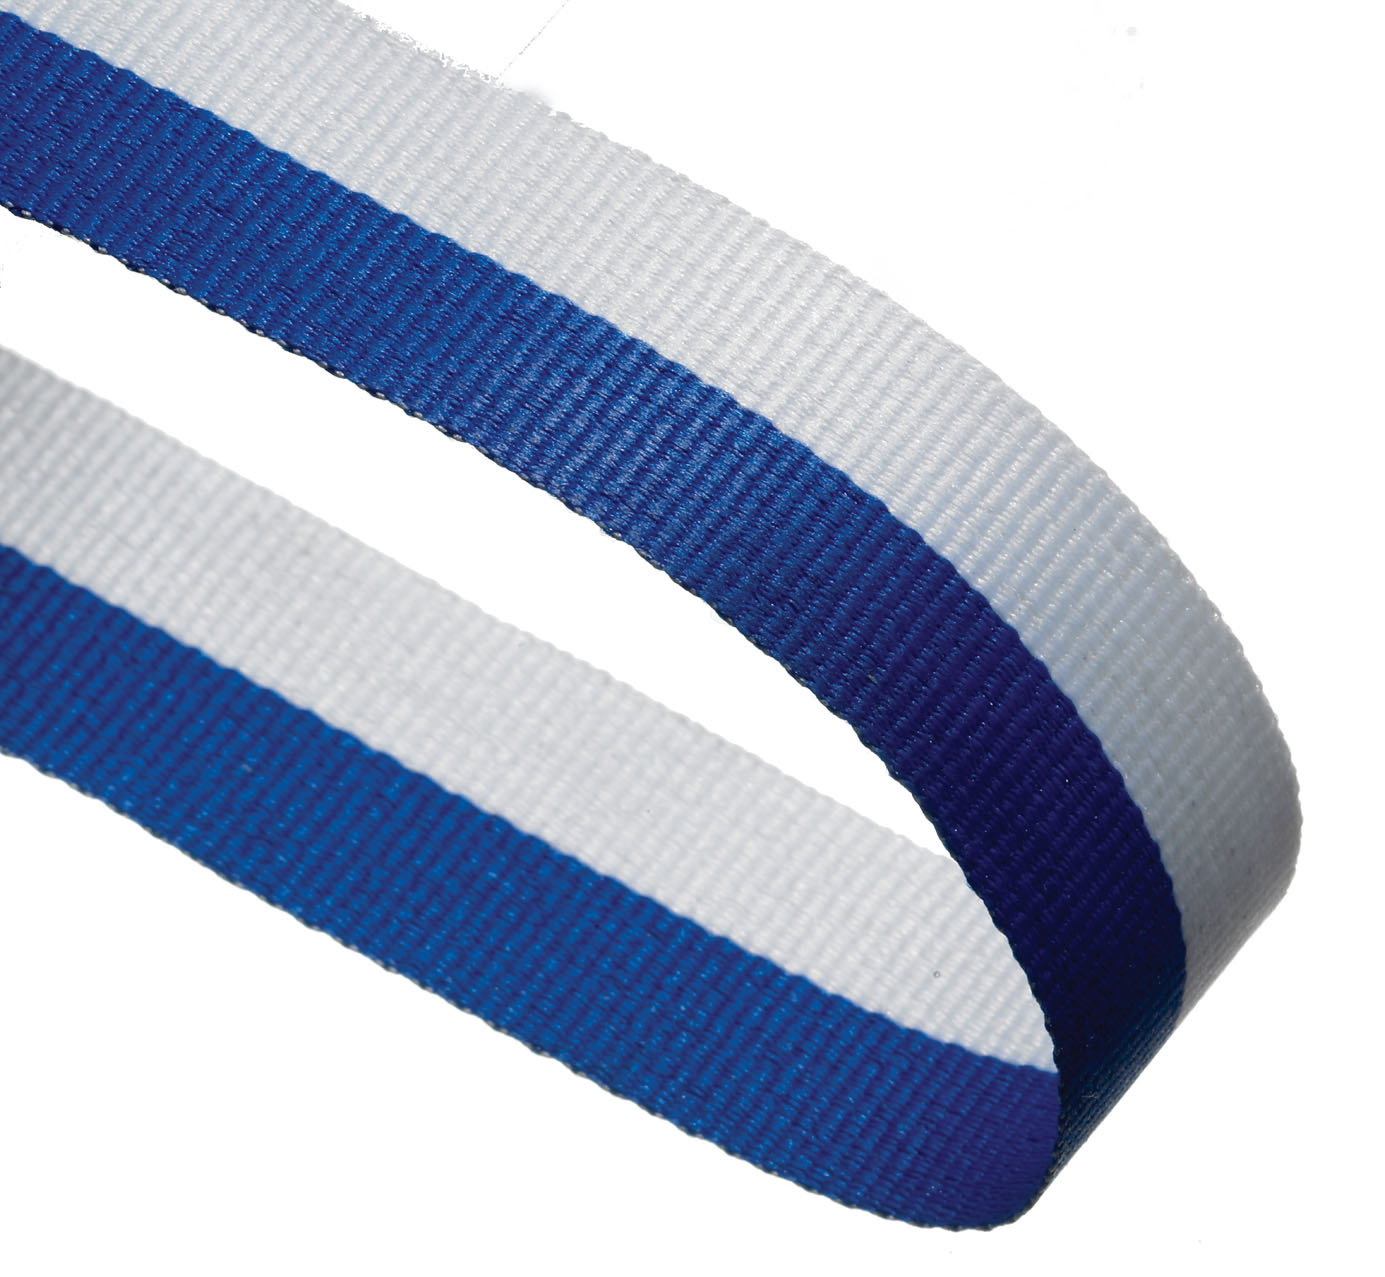 Blue / White Woven Medal Ribbons With Clip